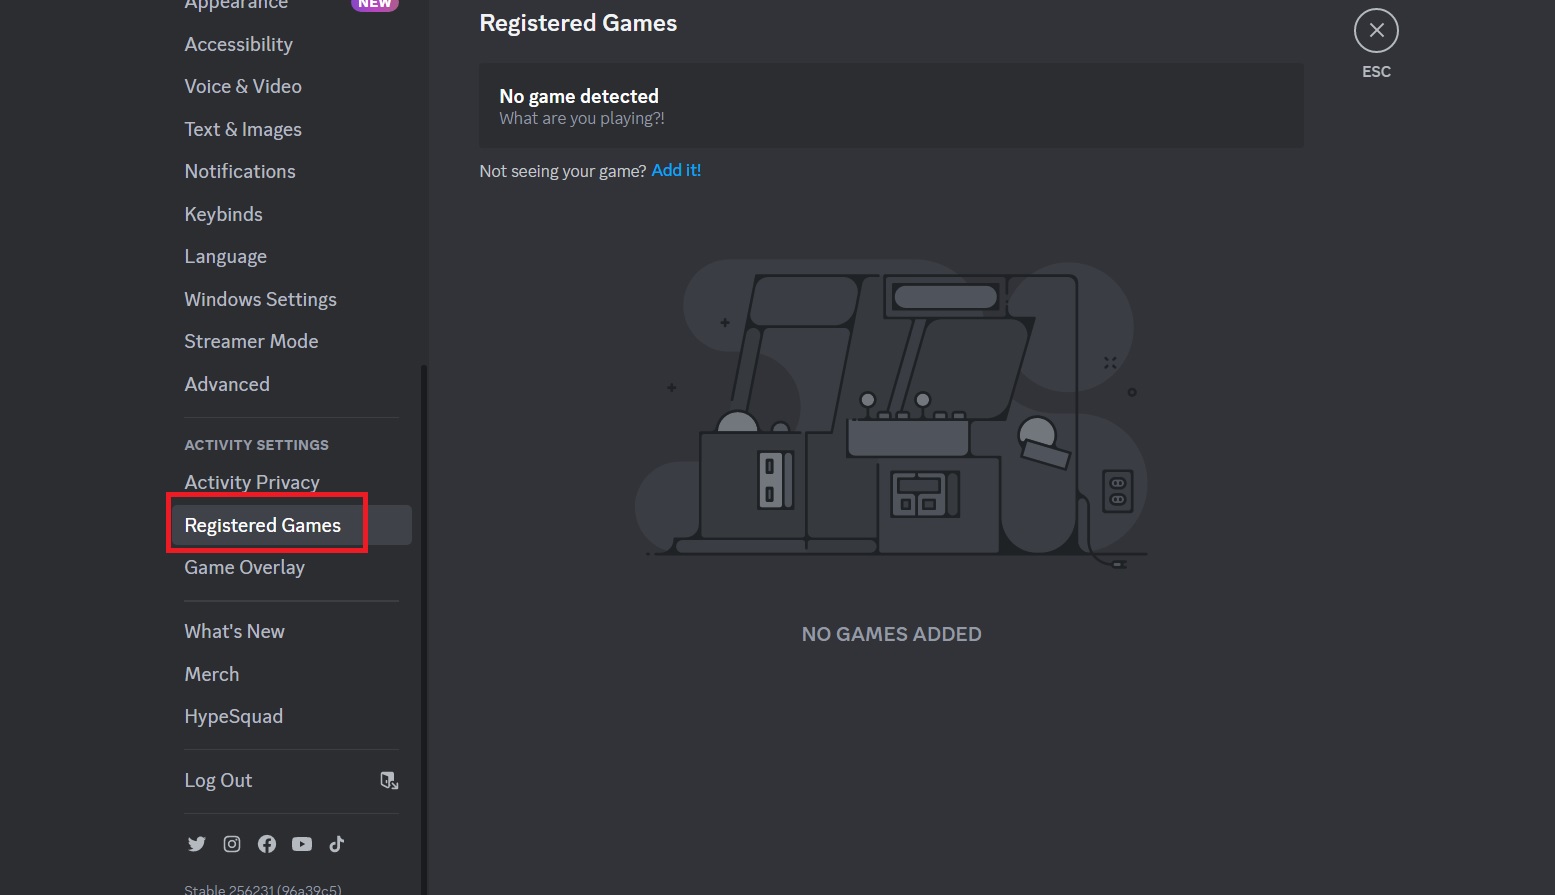 Registered Games setting on Discord